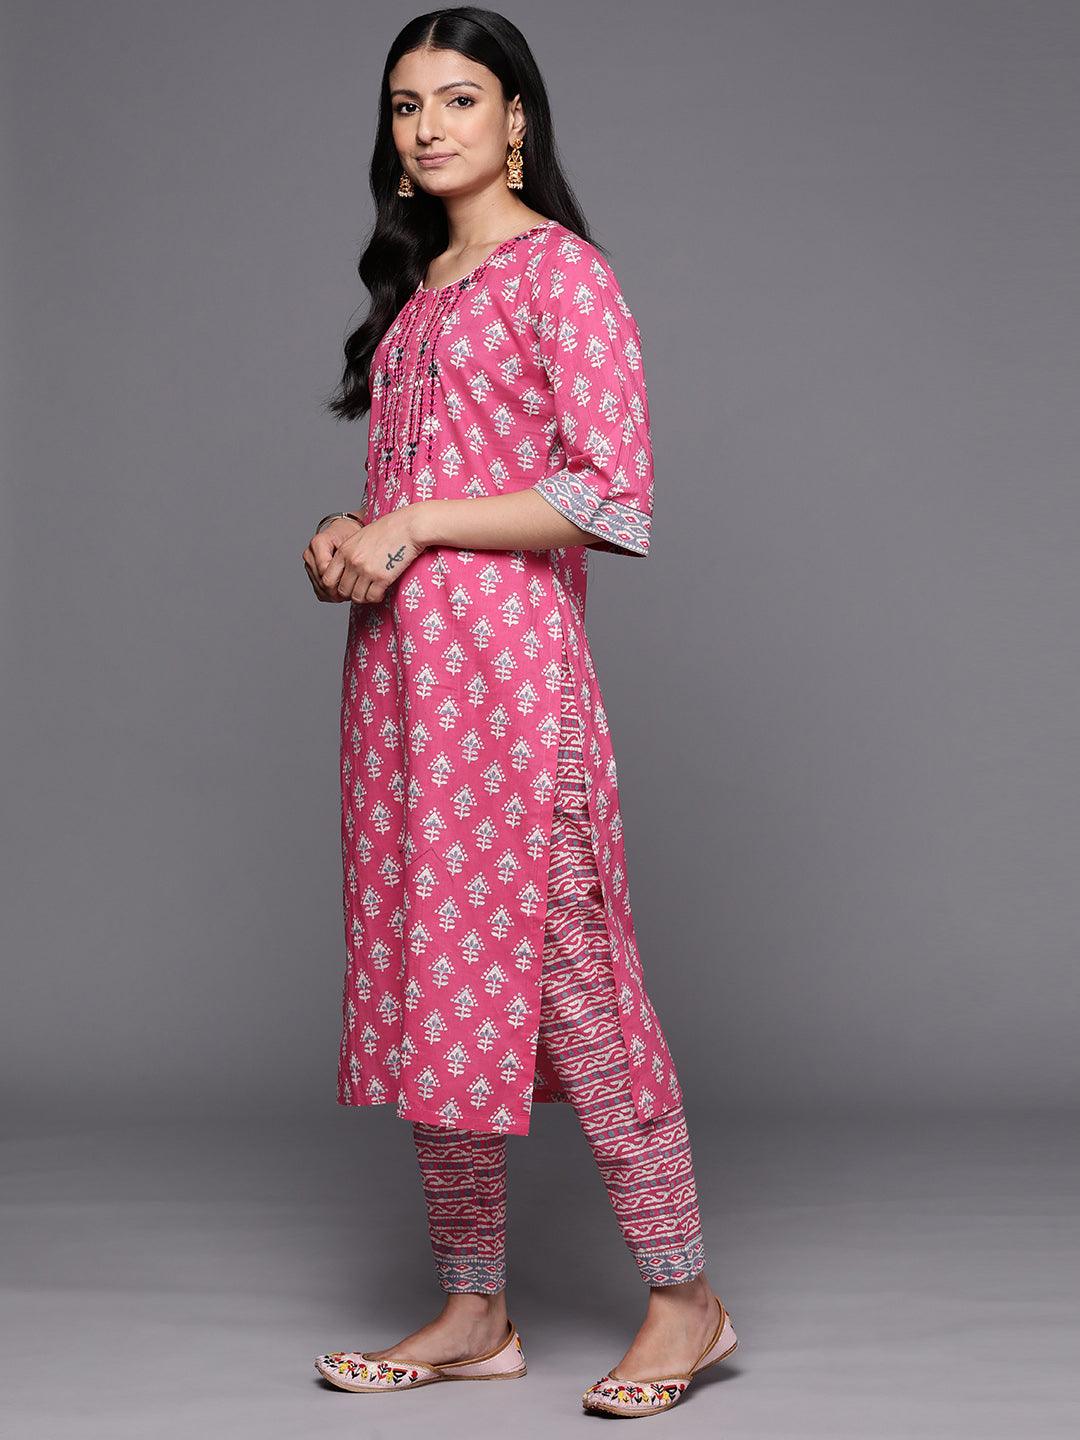 Pink Printed Cotton Straight Suit Set With Trousers - Libas